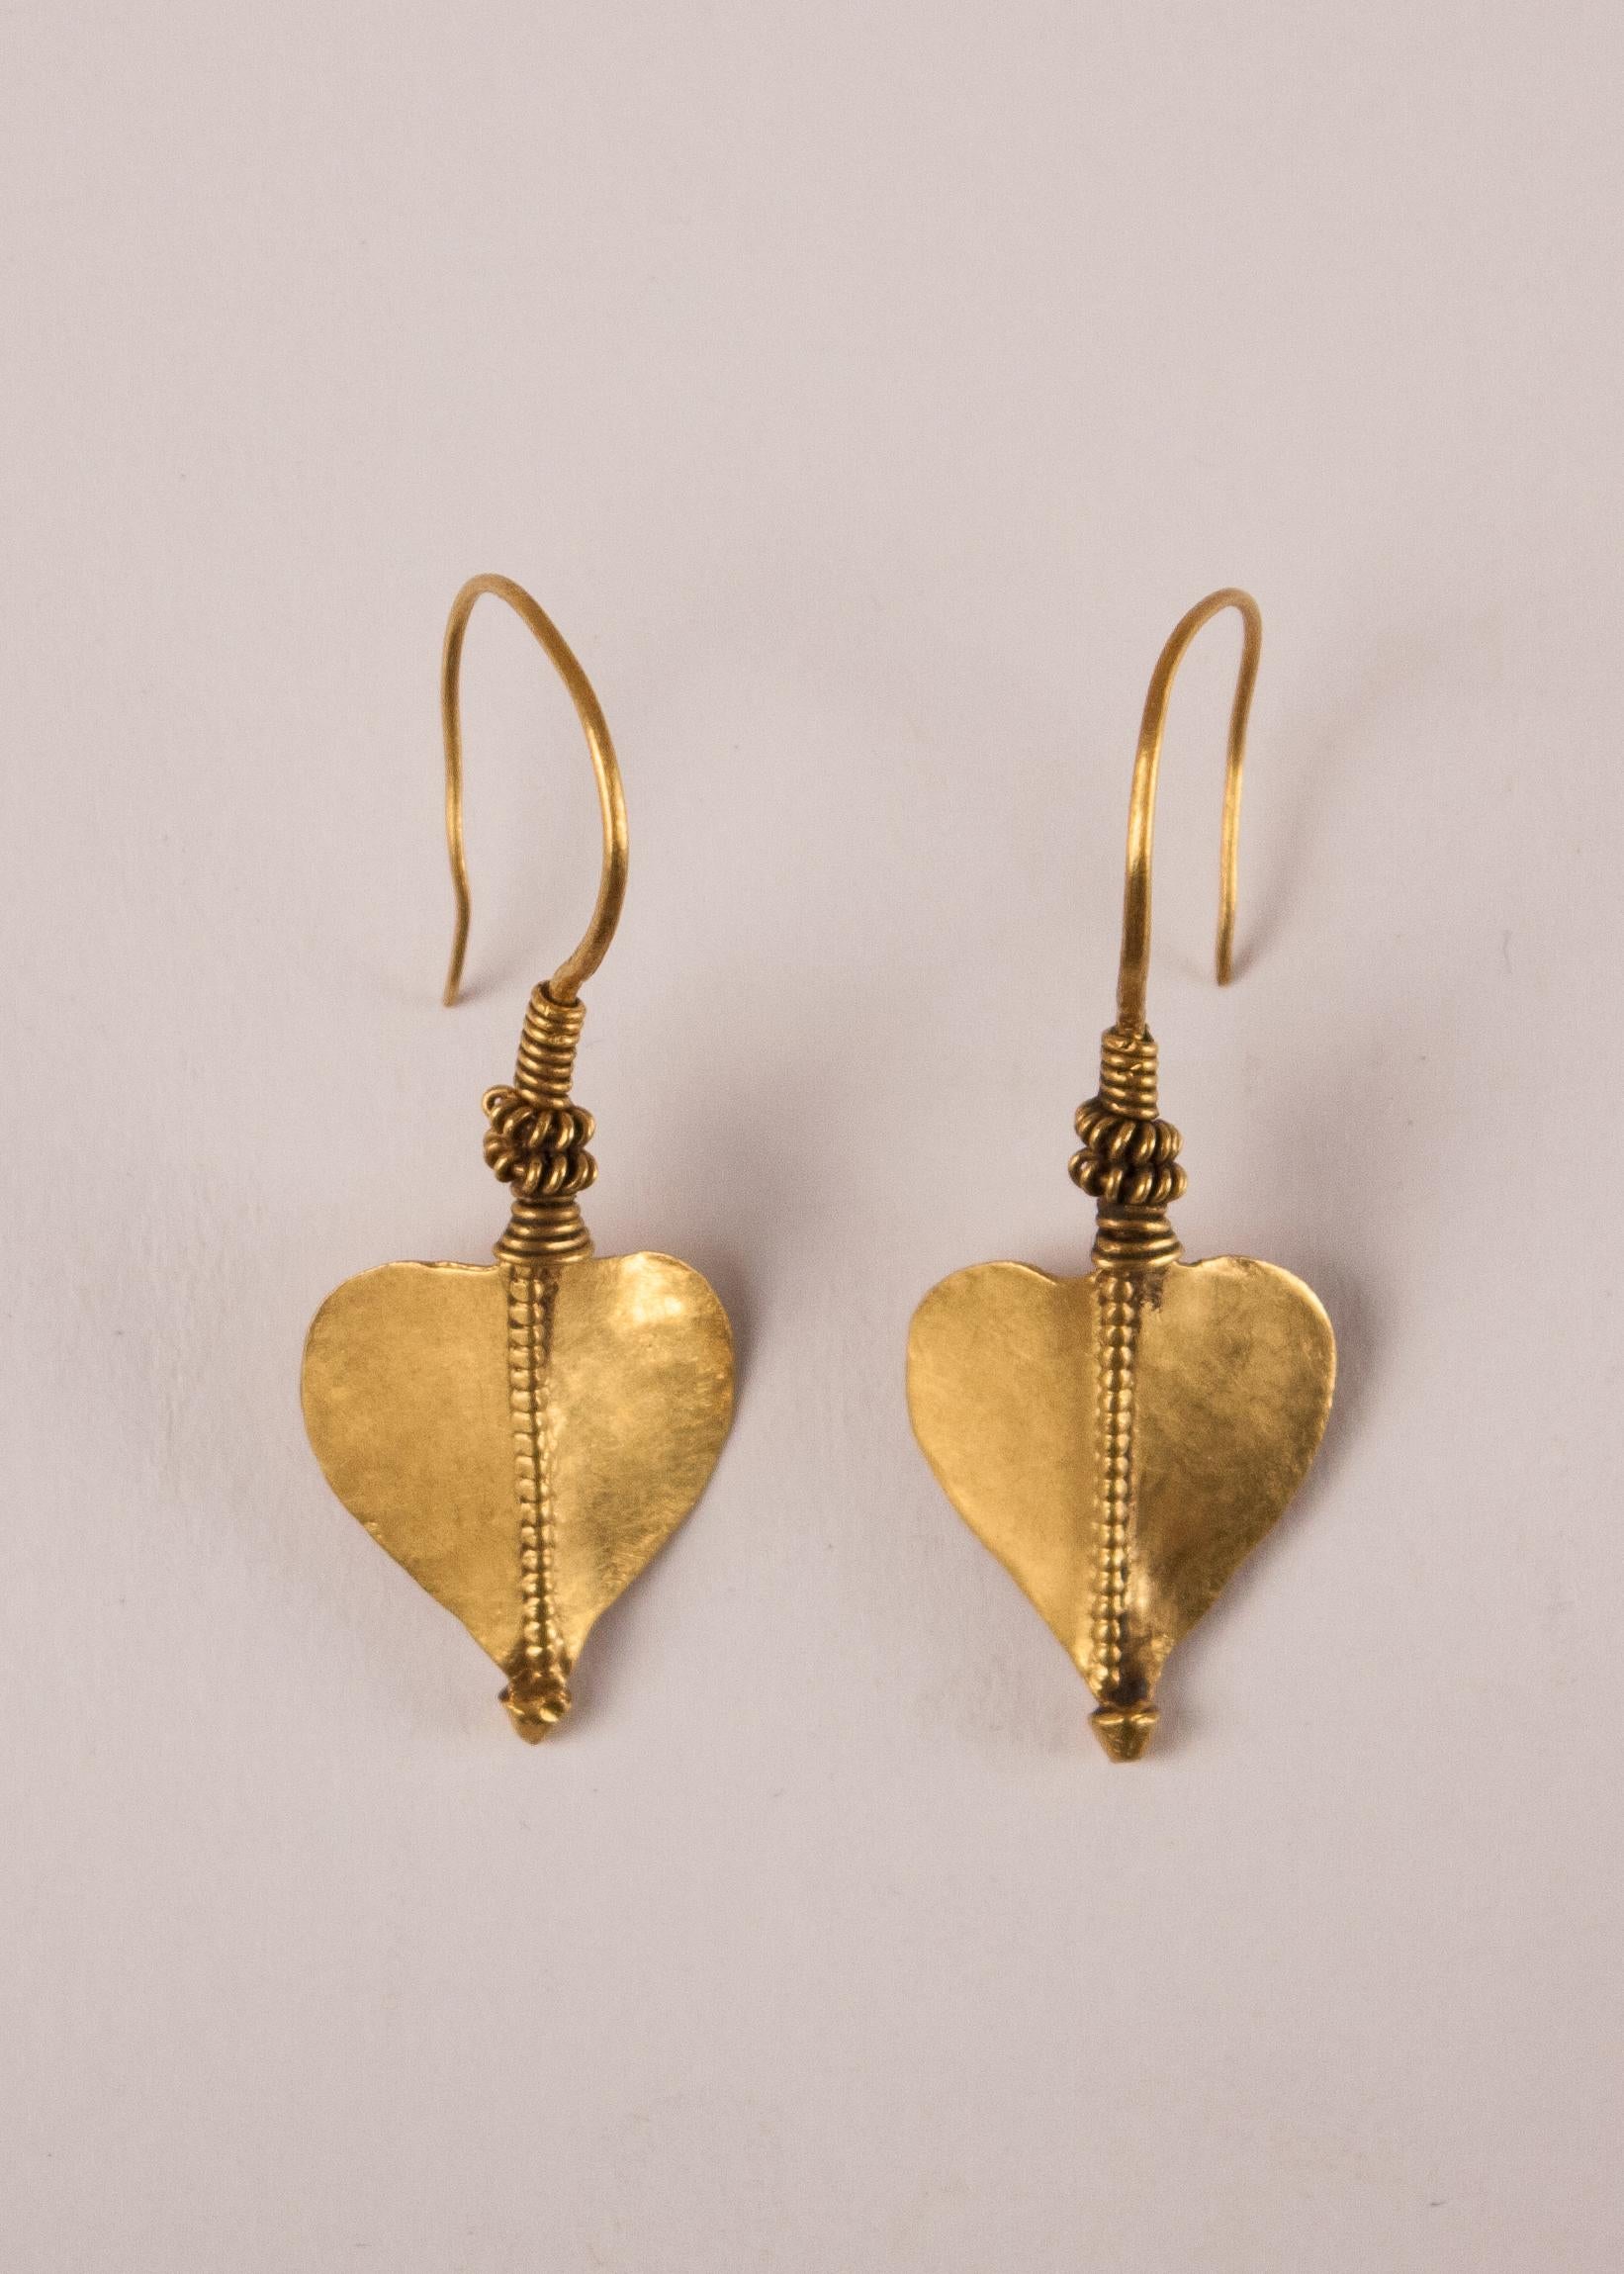 Collector's pair of 22 karat gold dangle earrings, circa 1930, from Rajasthan, India. These traditional earrings have a beautiful tone and hand-tooled traditional Indian leaf design inspired by the venerated peepal tree. They are versatile,